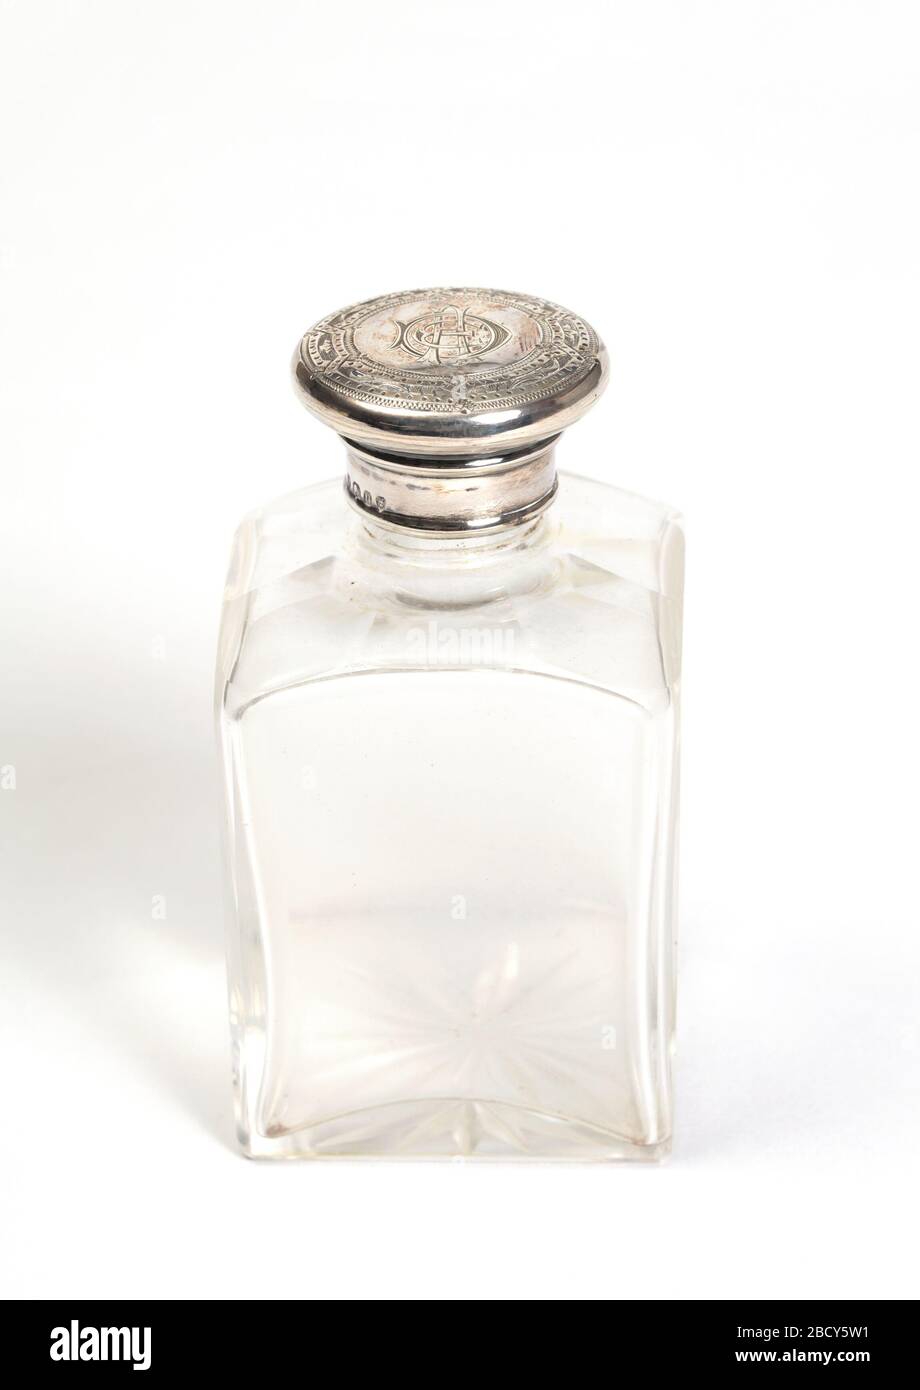 Bottle and cover. Research in ProgressLarger glass bottle with silver top, part of set. Bottle and cover Stock Photo